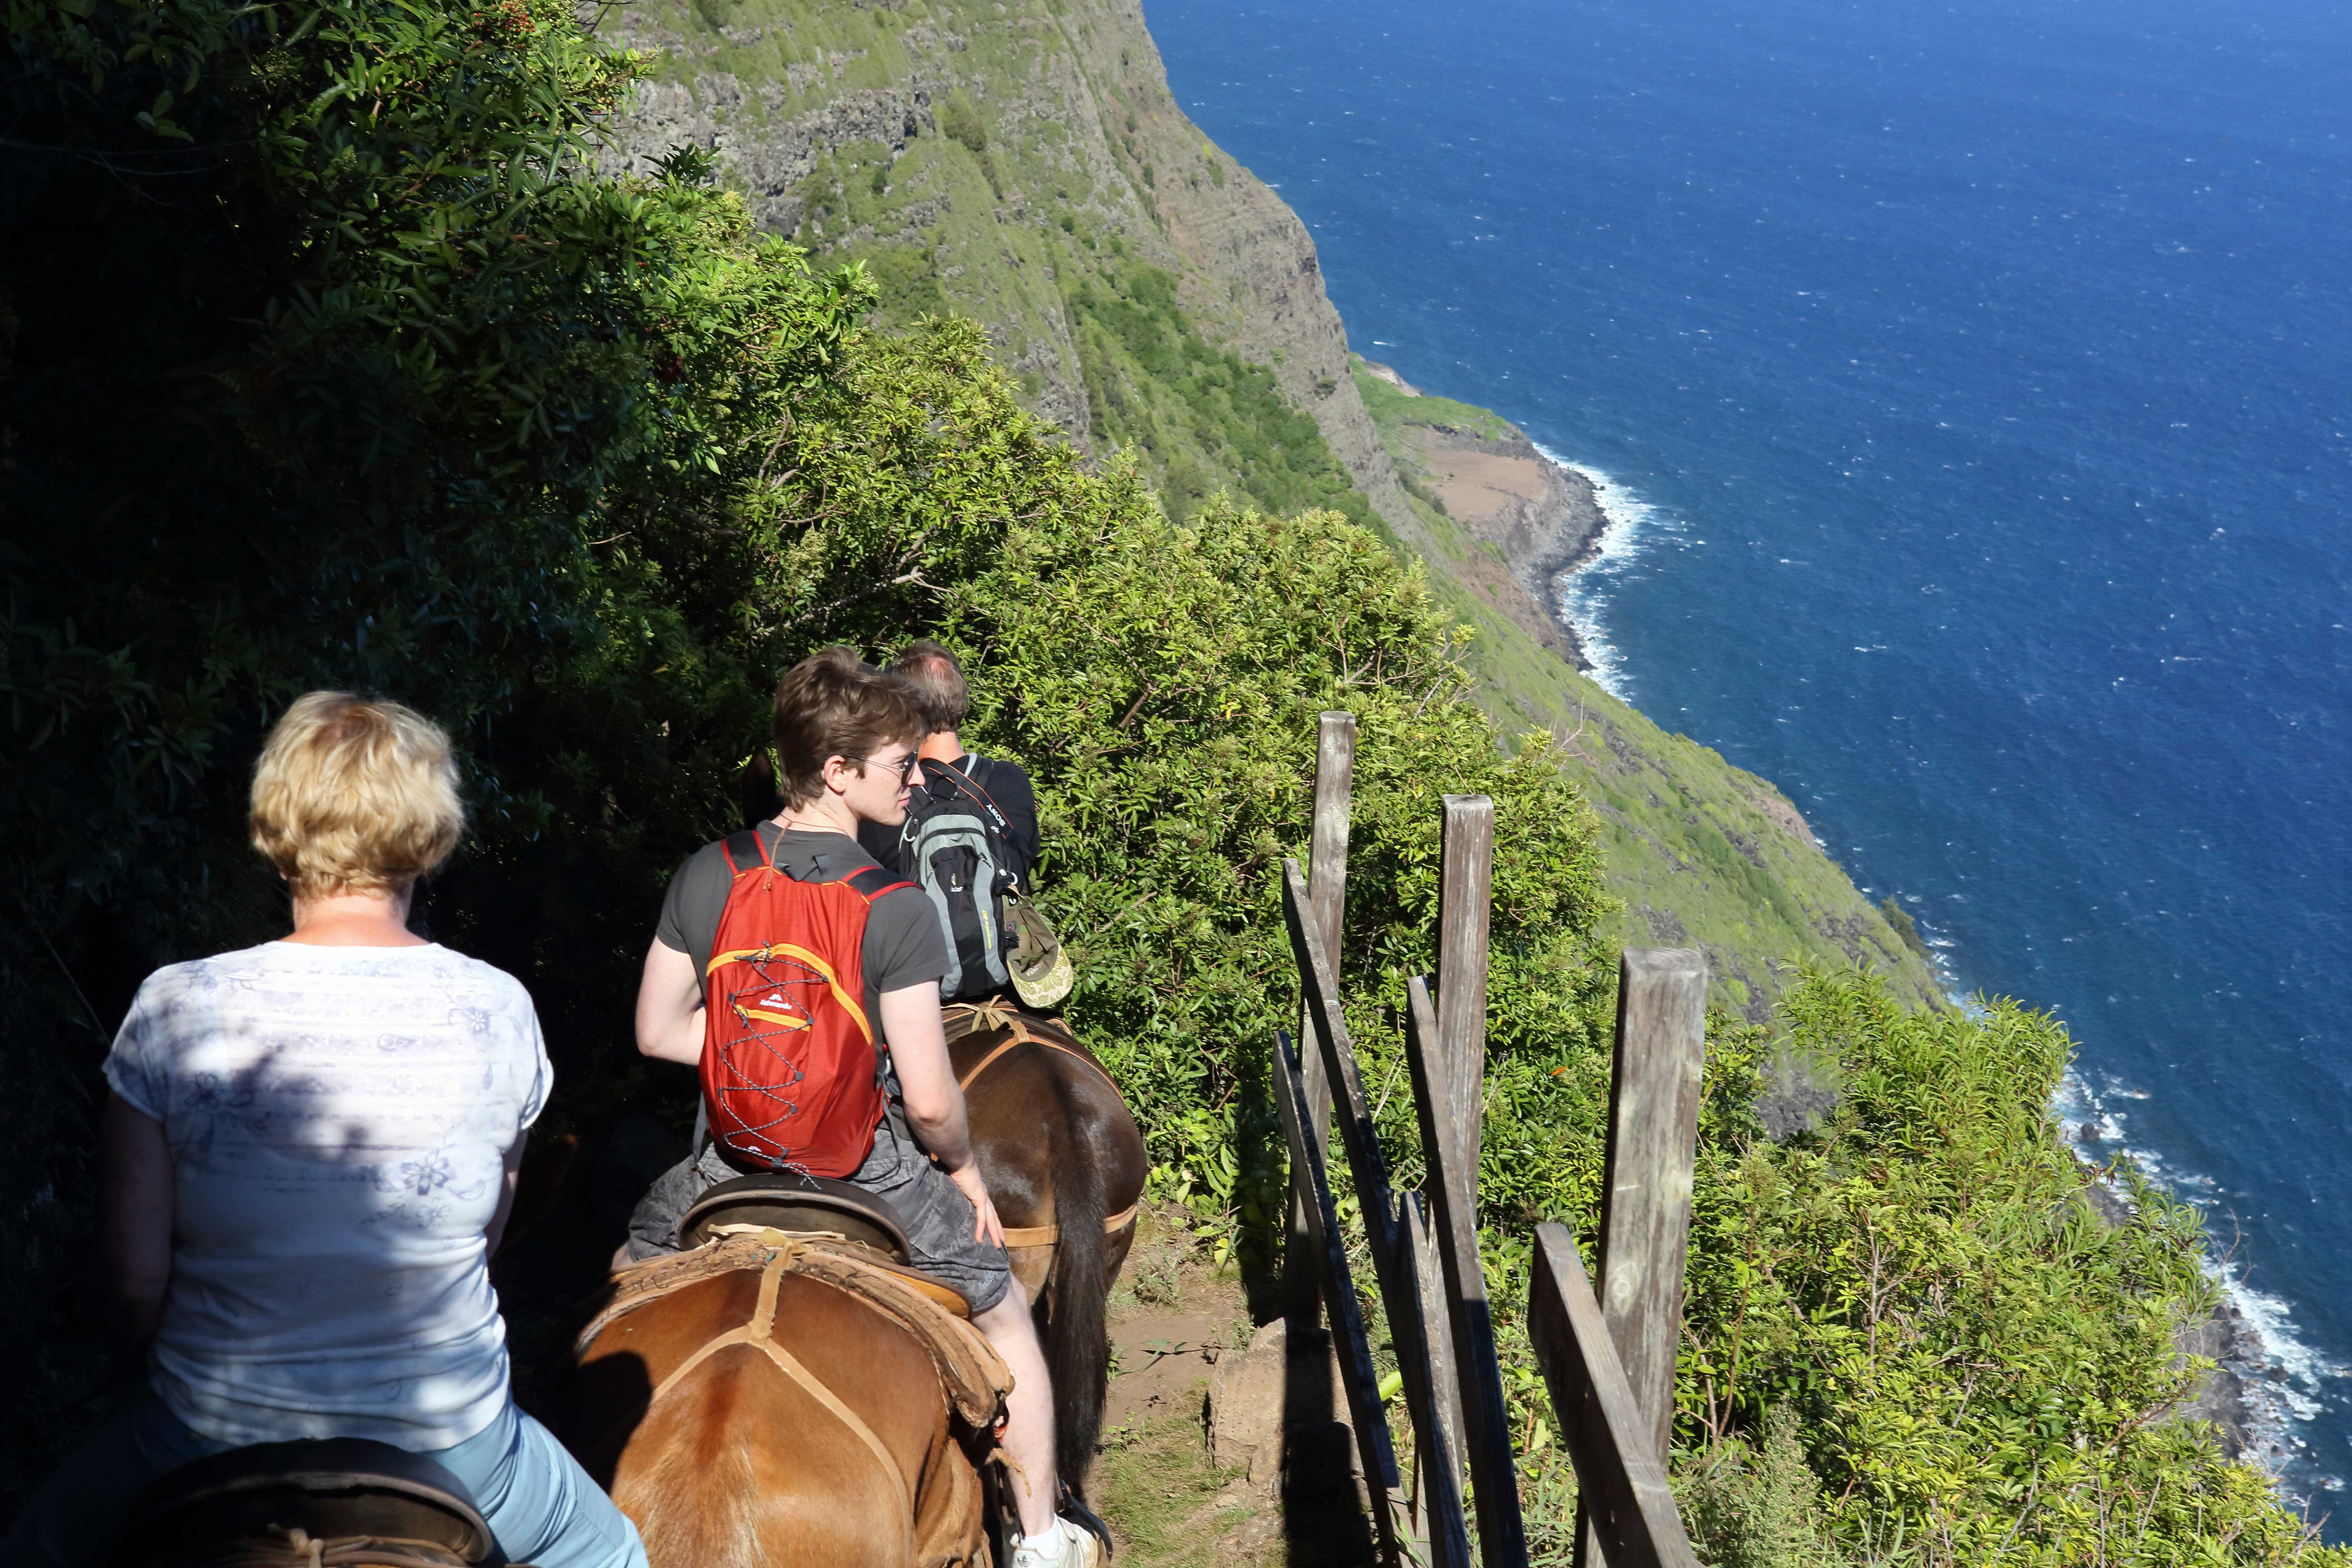 A mule ride into Kalaupapa National Historic Park. Image by Steven Greaves / Getty